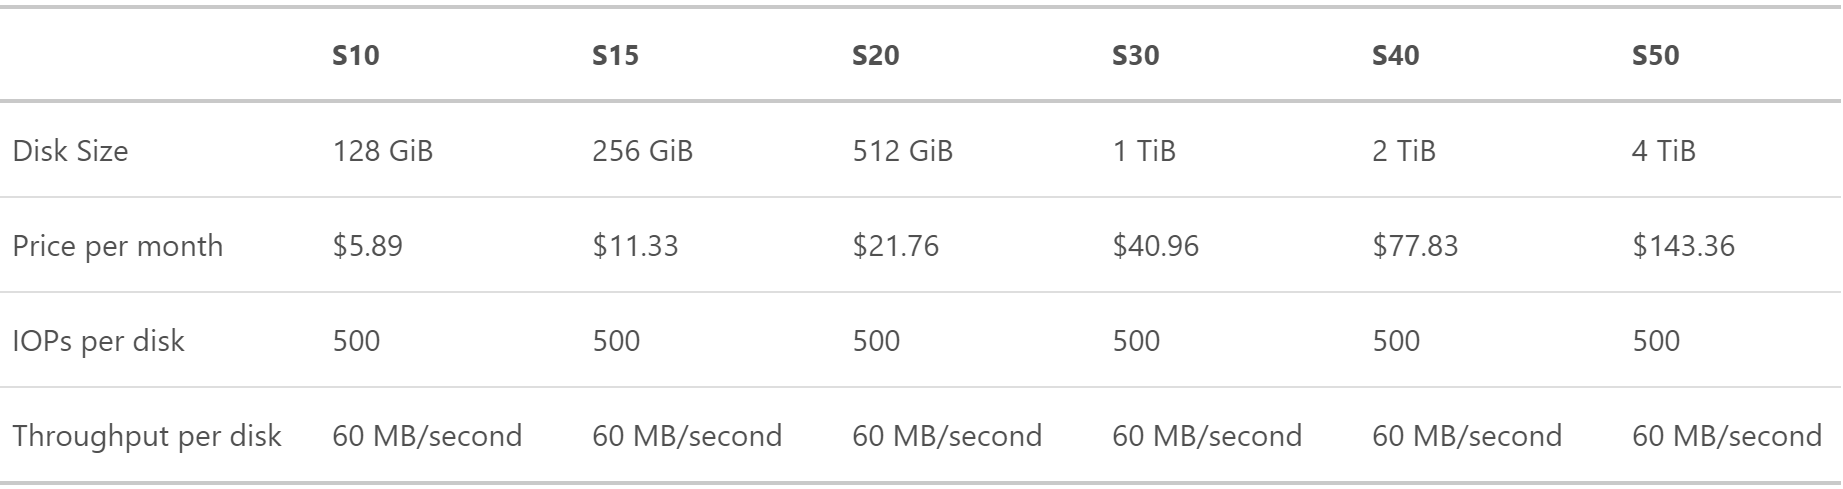 Standard HDD Pricing in East US [Image Credit: Microsoft]